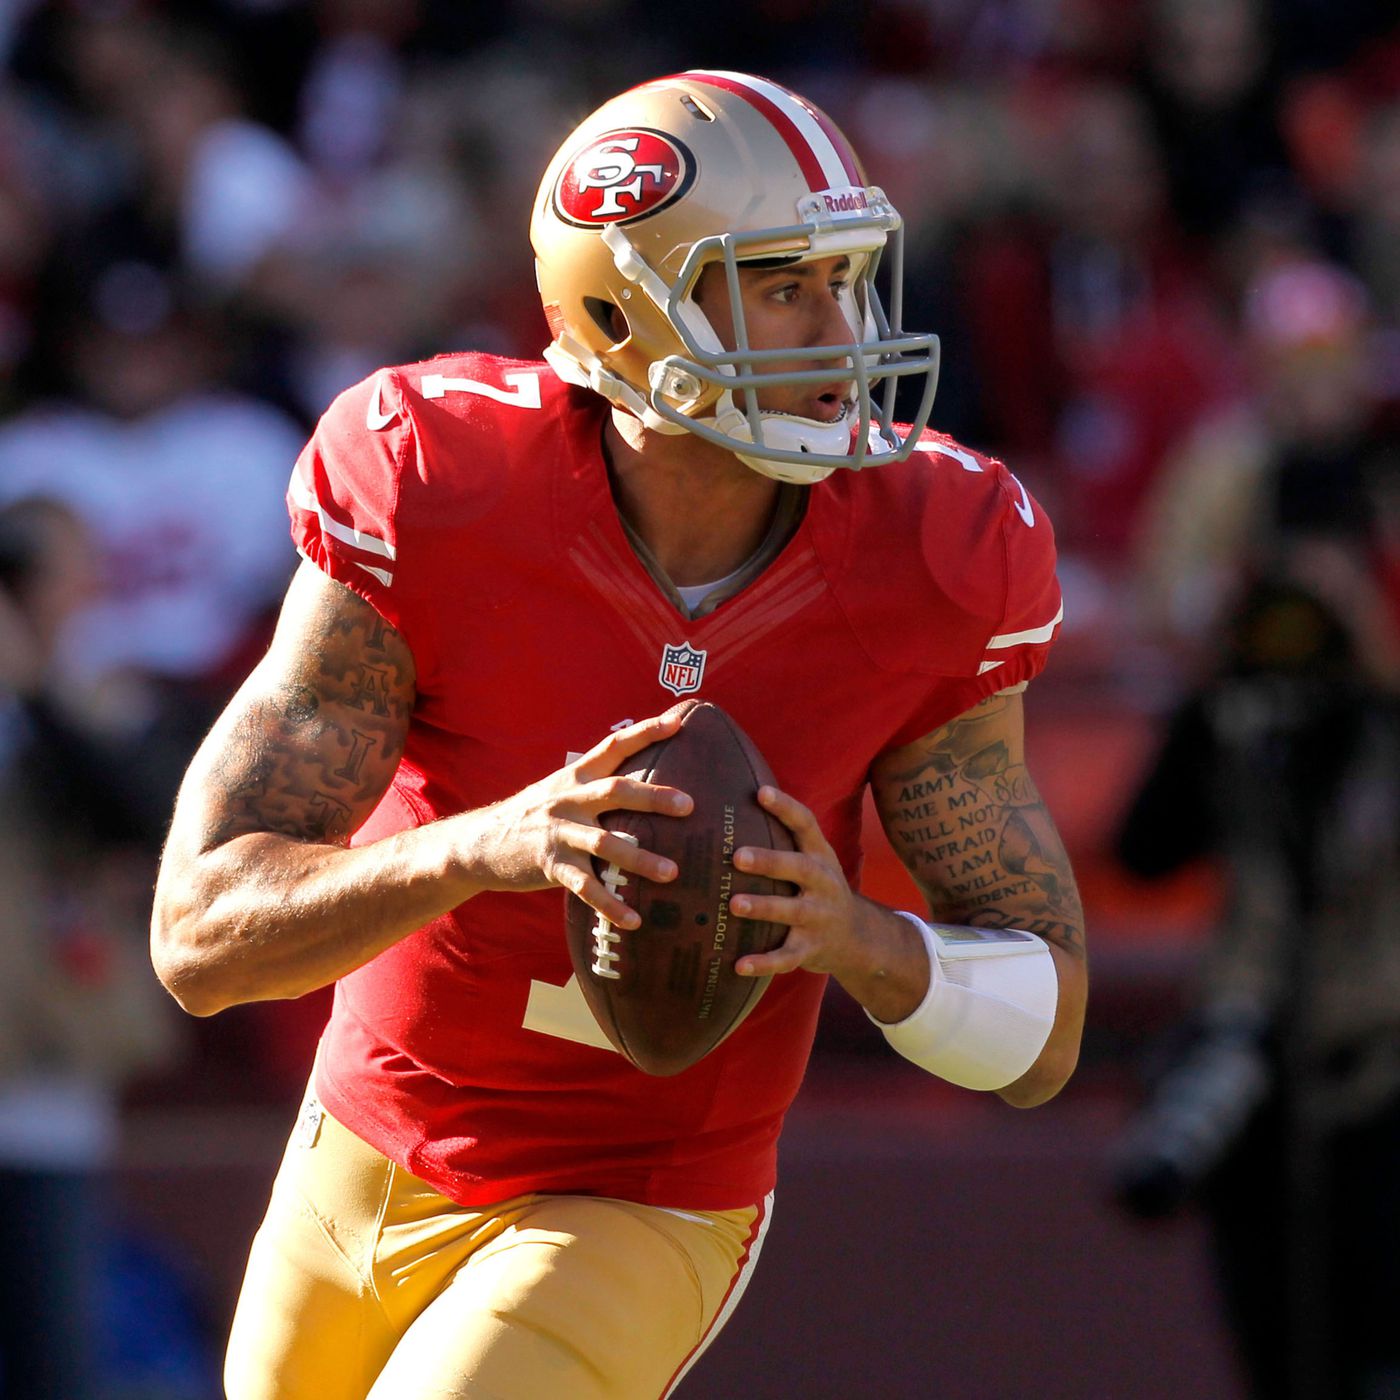 2013 Super Bowl prop bets: Colin Kaepernick is the odds on